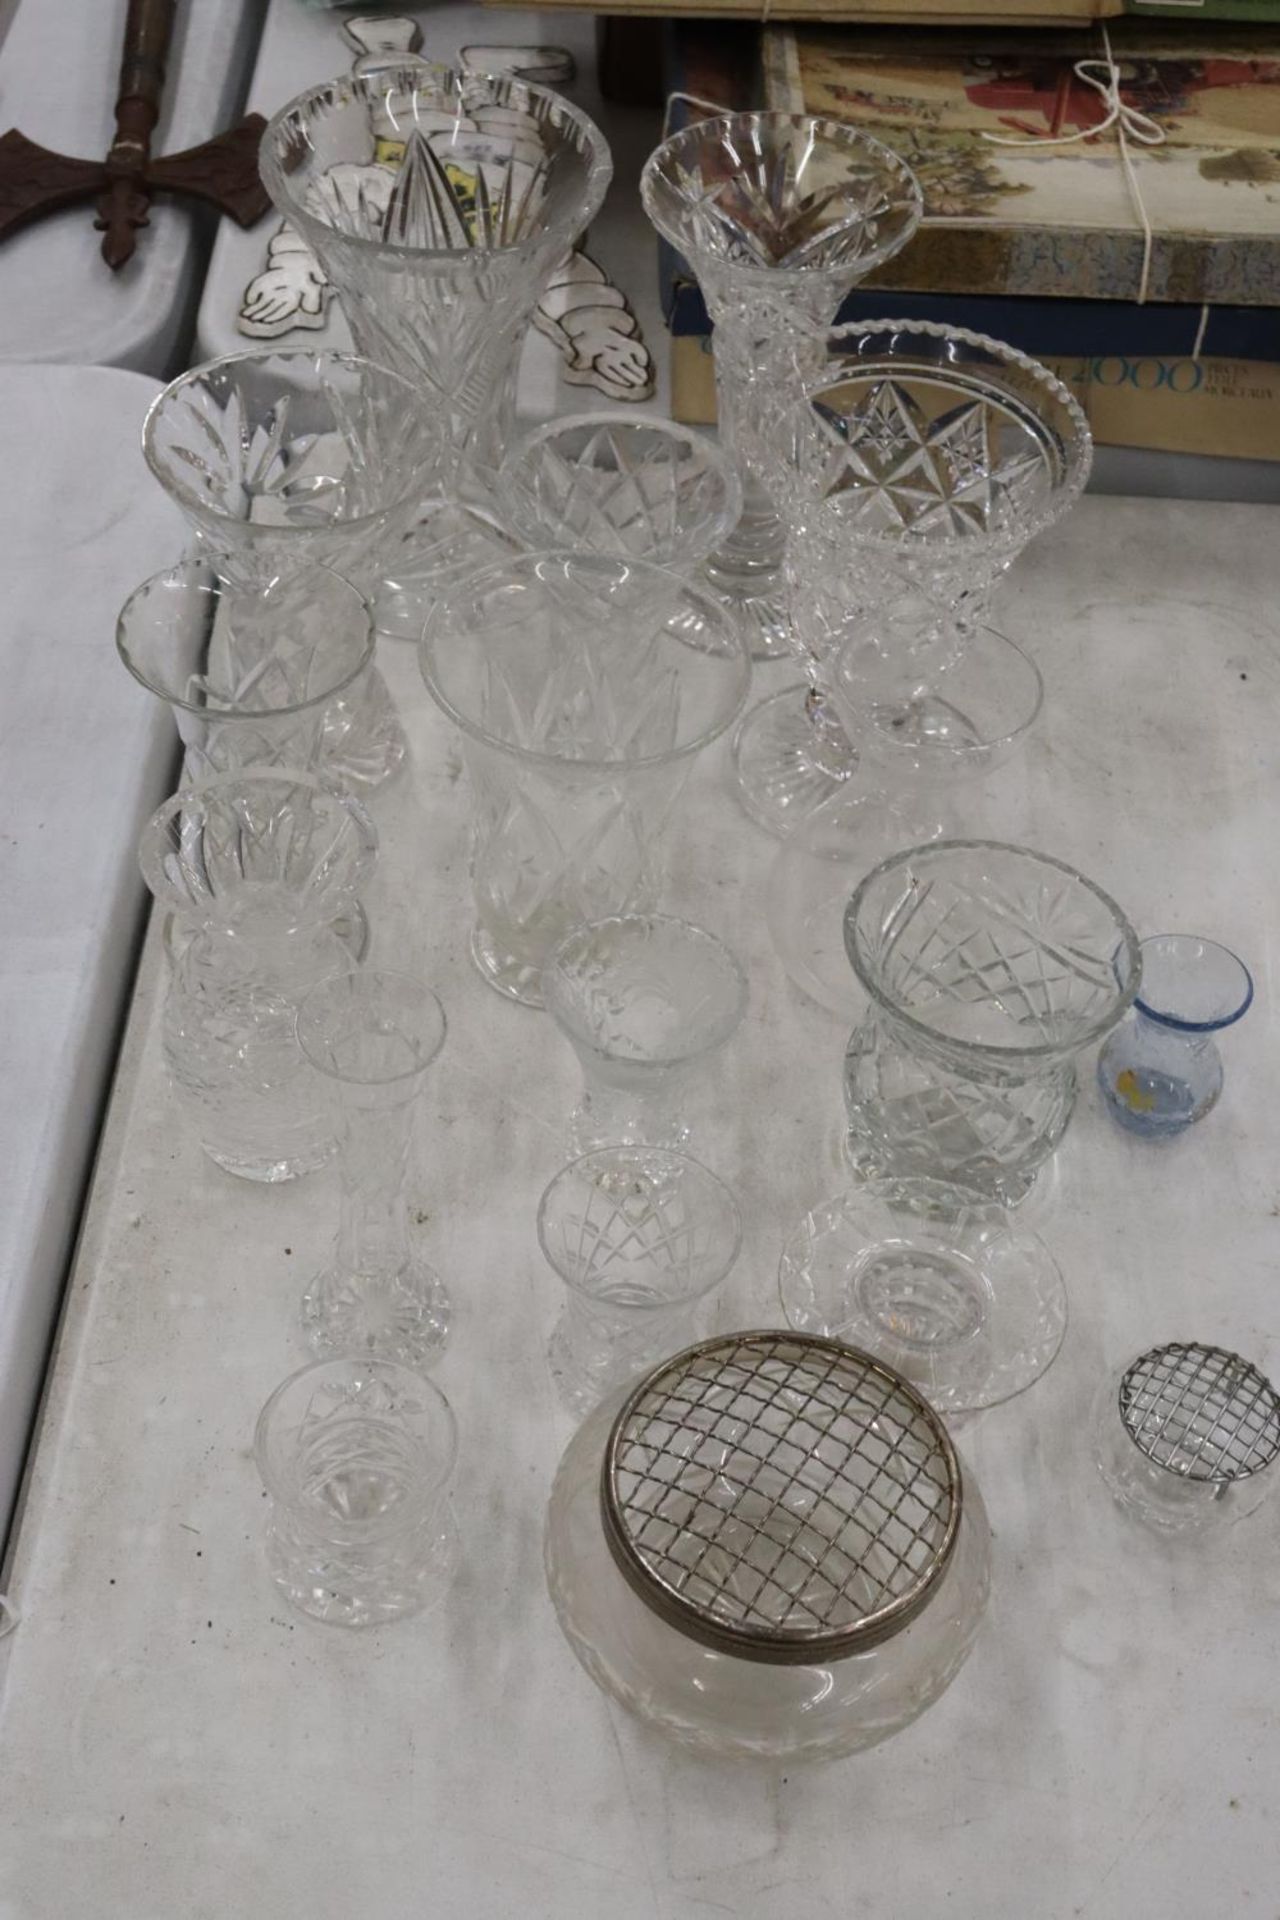 A LARGE QUANTITY OF GLASSWARE TO INCLUDE VASES AND ROSE BOWLS - Image 5 of 6